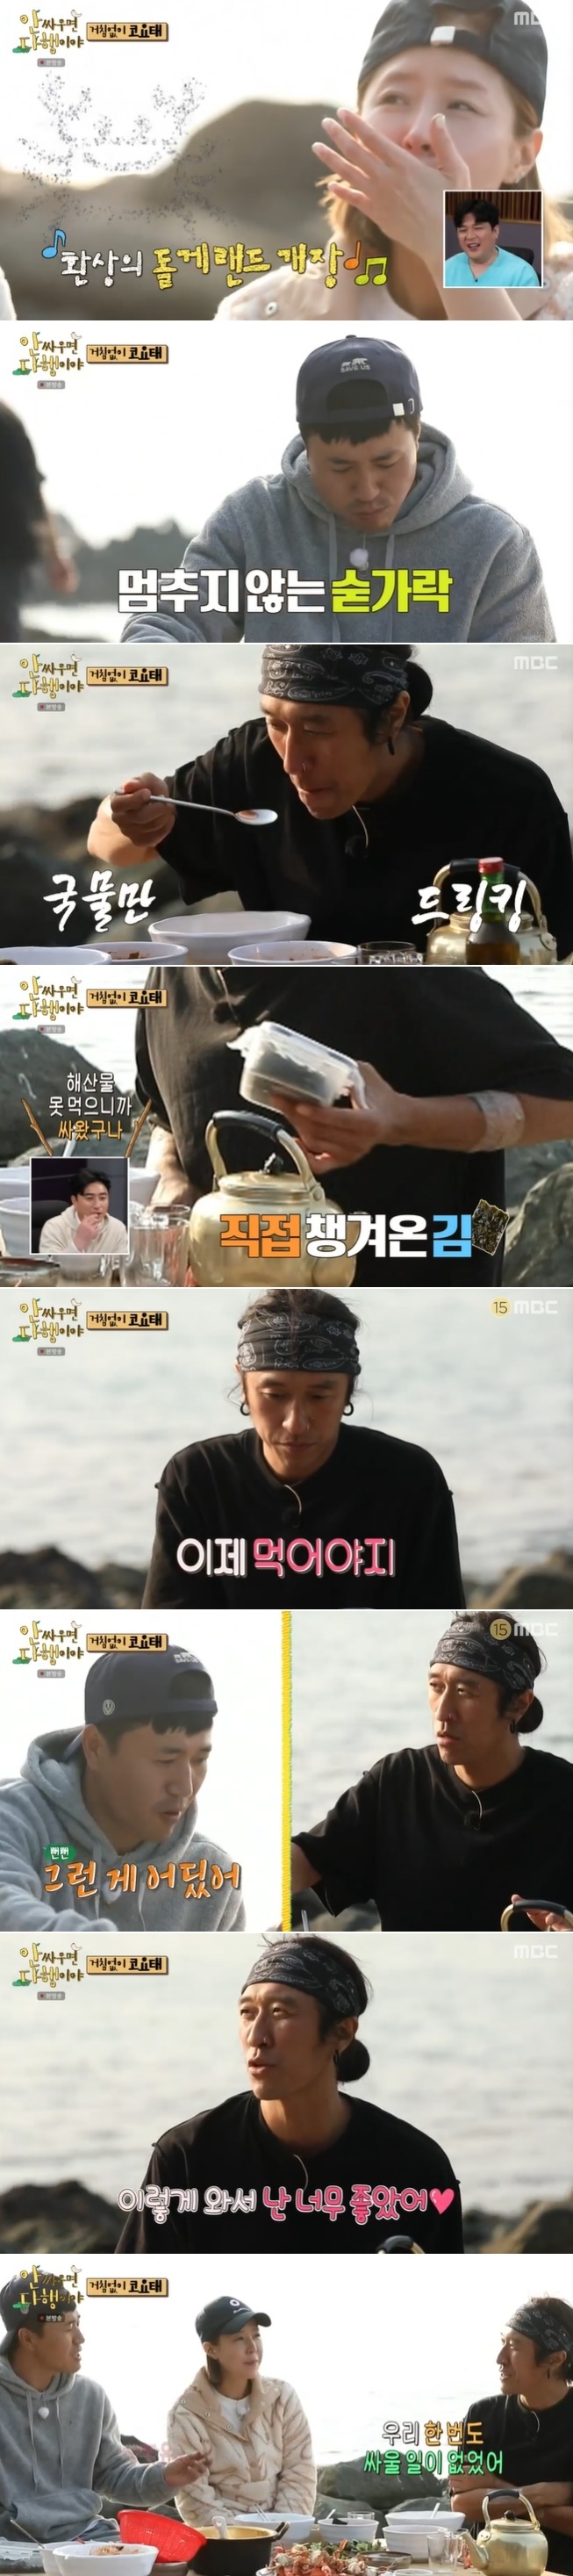 Koyote once again felt the steam friendship for his 24th year in his debut.In MBC Im Glad You Dont Fight broadcast on January 24, the second story of Koyote Kim Jong-min, Shin Ji, and Baekgas My Hands (I Eat With My Hands) was revealed and attracted attention.The members of Koyote, who spent the night tenting on the island, decided to roast beans on the lid of the cauldron to make morning coffee, a suggestion from camperman, the pack.However, he made a mistake and burned the coffee beans black, and eventually the coffee was completed only after Shin Jis efforts.You have to go 4:3:3 like a profit, said Backga, and started sharing coffee.In the past, Shin Ji said that 40% of Koyotes profits and 30% of Kim Jong-min and the rest of the time are divided by 30% in the entertainment program.and laughed.However, the coffee that was finished with a lot of good taste was not very good, and the back was spitting, and Shin Ji frowned, Is it originally tasted iron in coffee?The Koyote members then used their hatches to catch bollaks, gypsums and bruising, and set up a hearty breakfast prize, but there was a problem, as the gypsum had no seafood at all.When I was a child, I had a thorn while eating mackerel, and I have not been able to eat seafood since then, he confessed.Shin Ji, who ate a precious natural bean curd bibimbap, said to the back of the rice that can not hold a spoon, What do you do not know this taste? This is a crazy taste.Then he pulled out the back of his spleen. He had been prepared for this.However, Kim Jong-min said, Lets eat some Kim without notice, and Baekga said, I have nothing to eat.Kim Jong-min continued to raise the medicine saying, Give me Kim, and Shin Ji said, Stop it!, boasting a 24-year-old tit-for-tat chemistry.